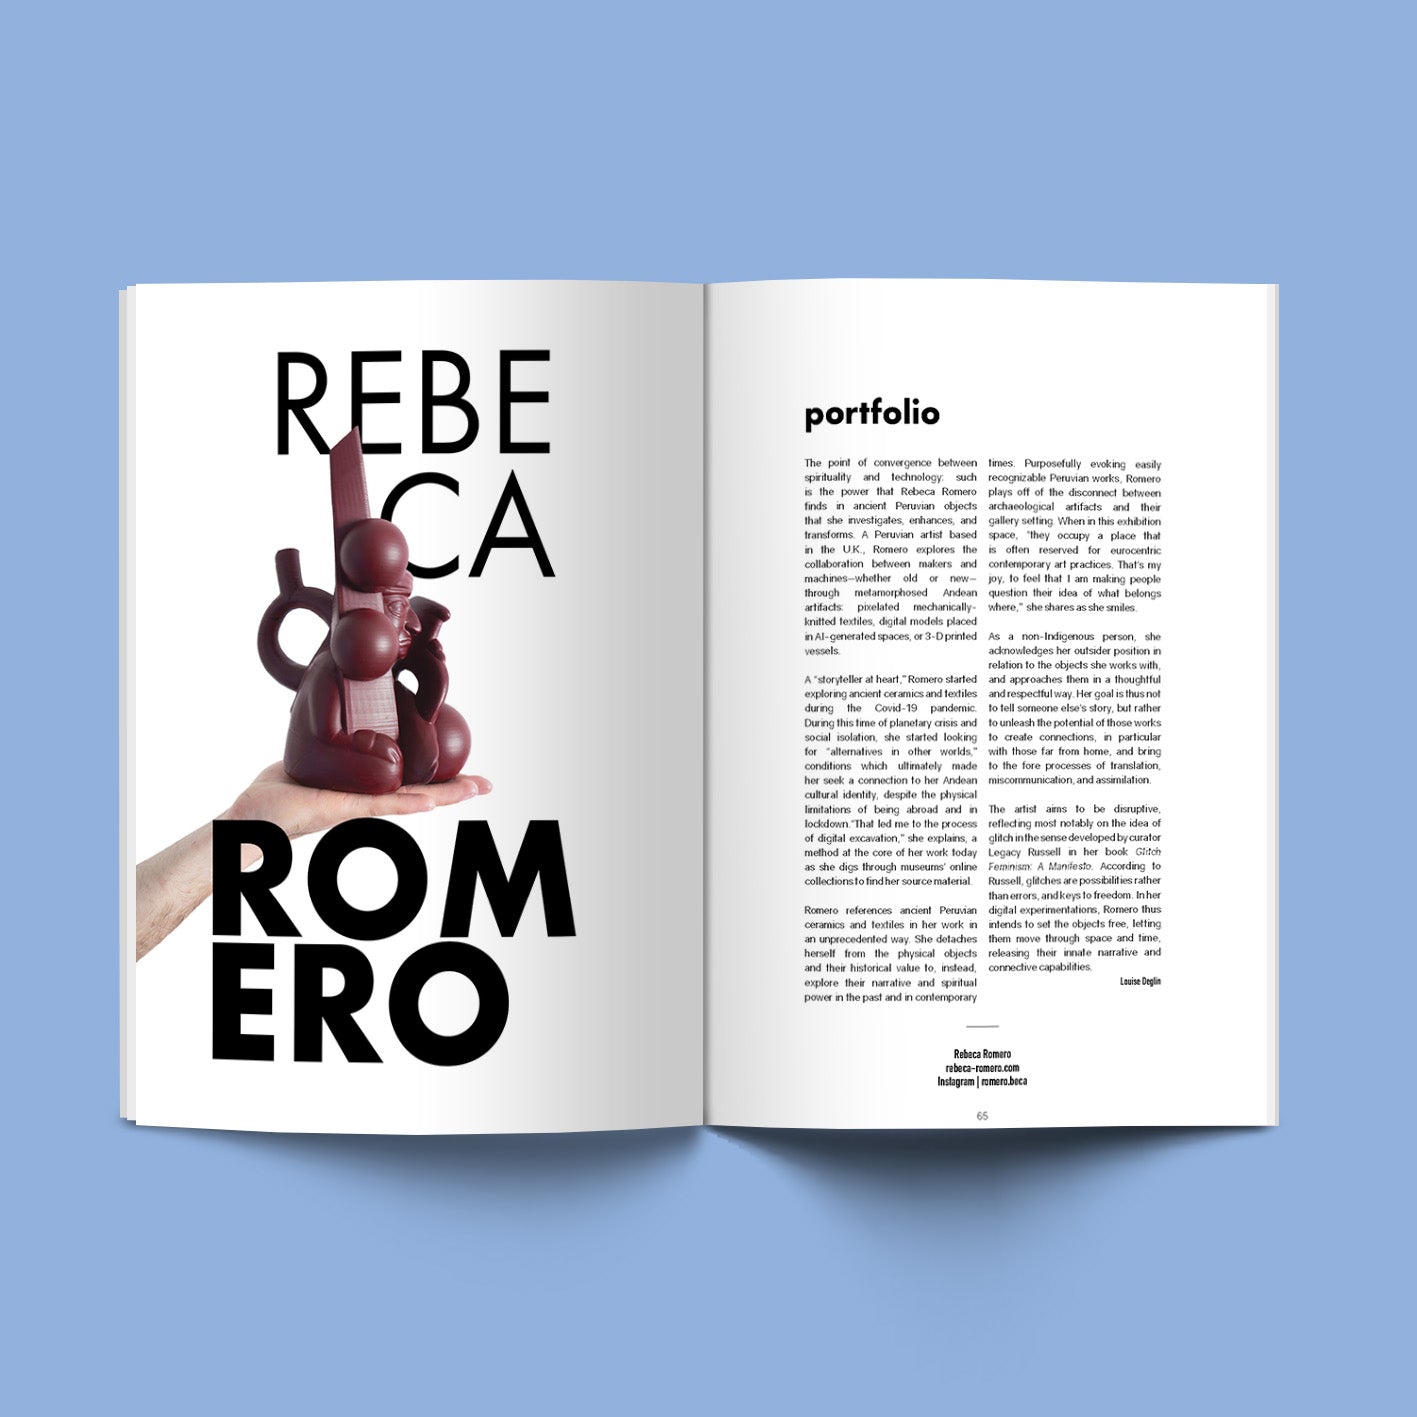 Mockup of the third issue of Convergence Magazine in French. Title page of the portfolio featuring Rebeca Romero, with on the left her name juxtaposed to one of her ceramics, and on the right a page of text.